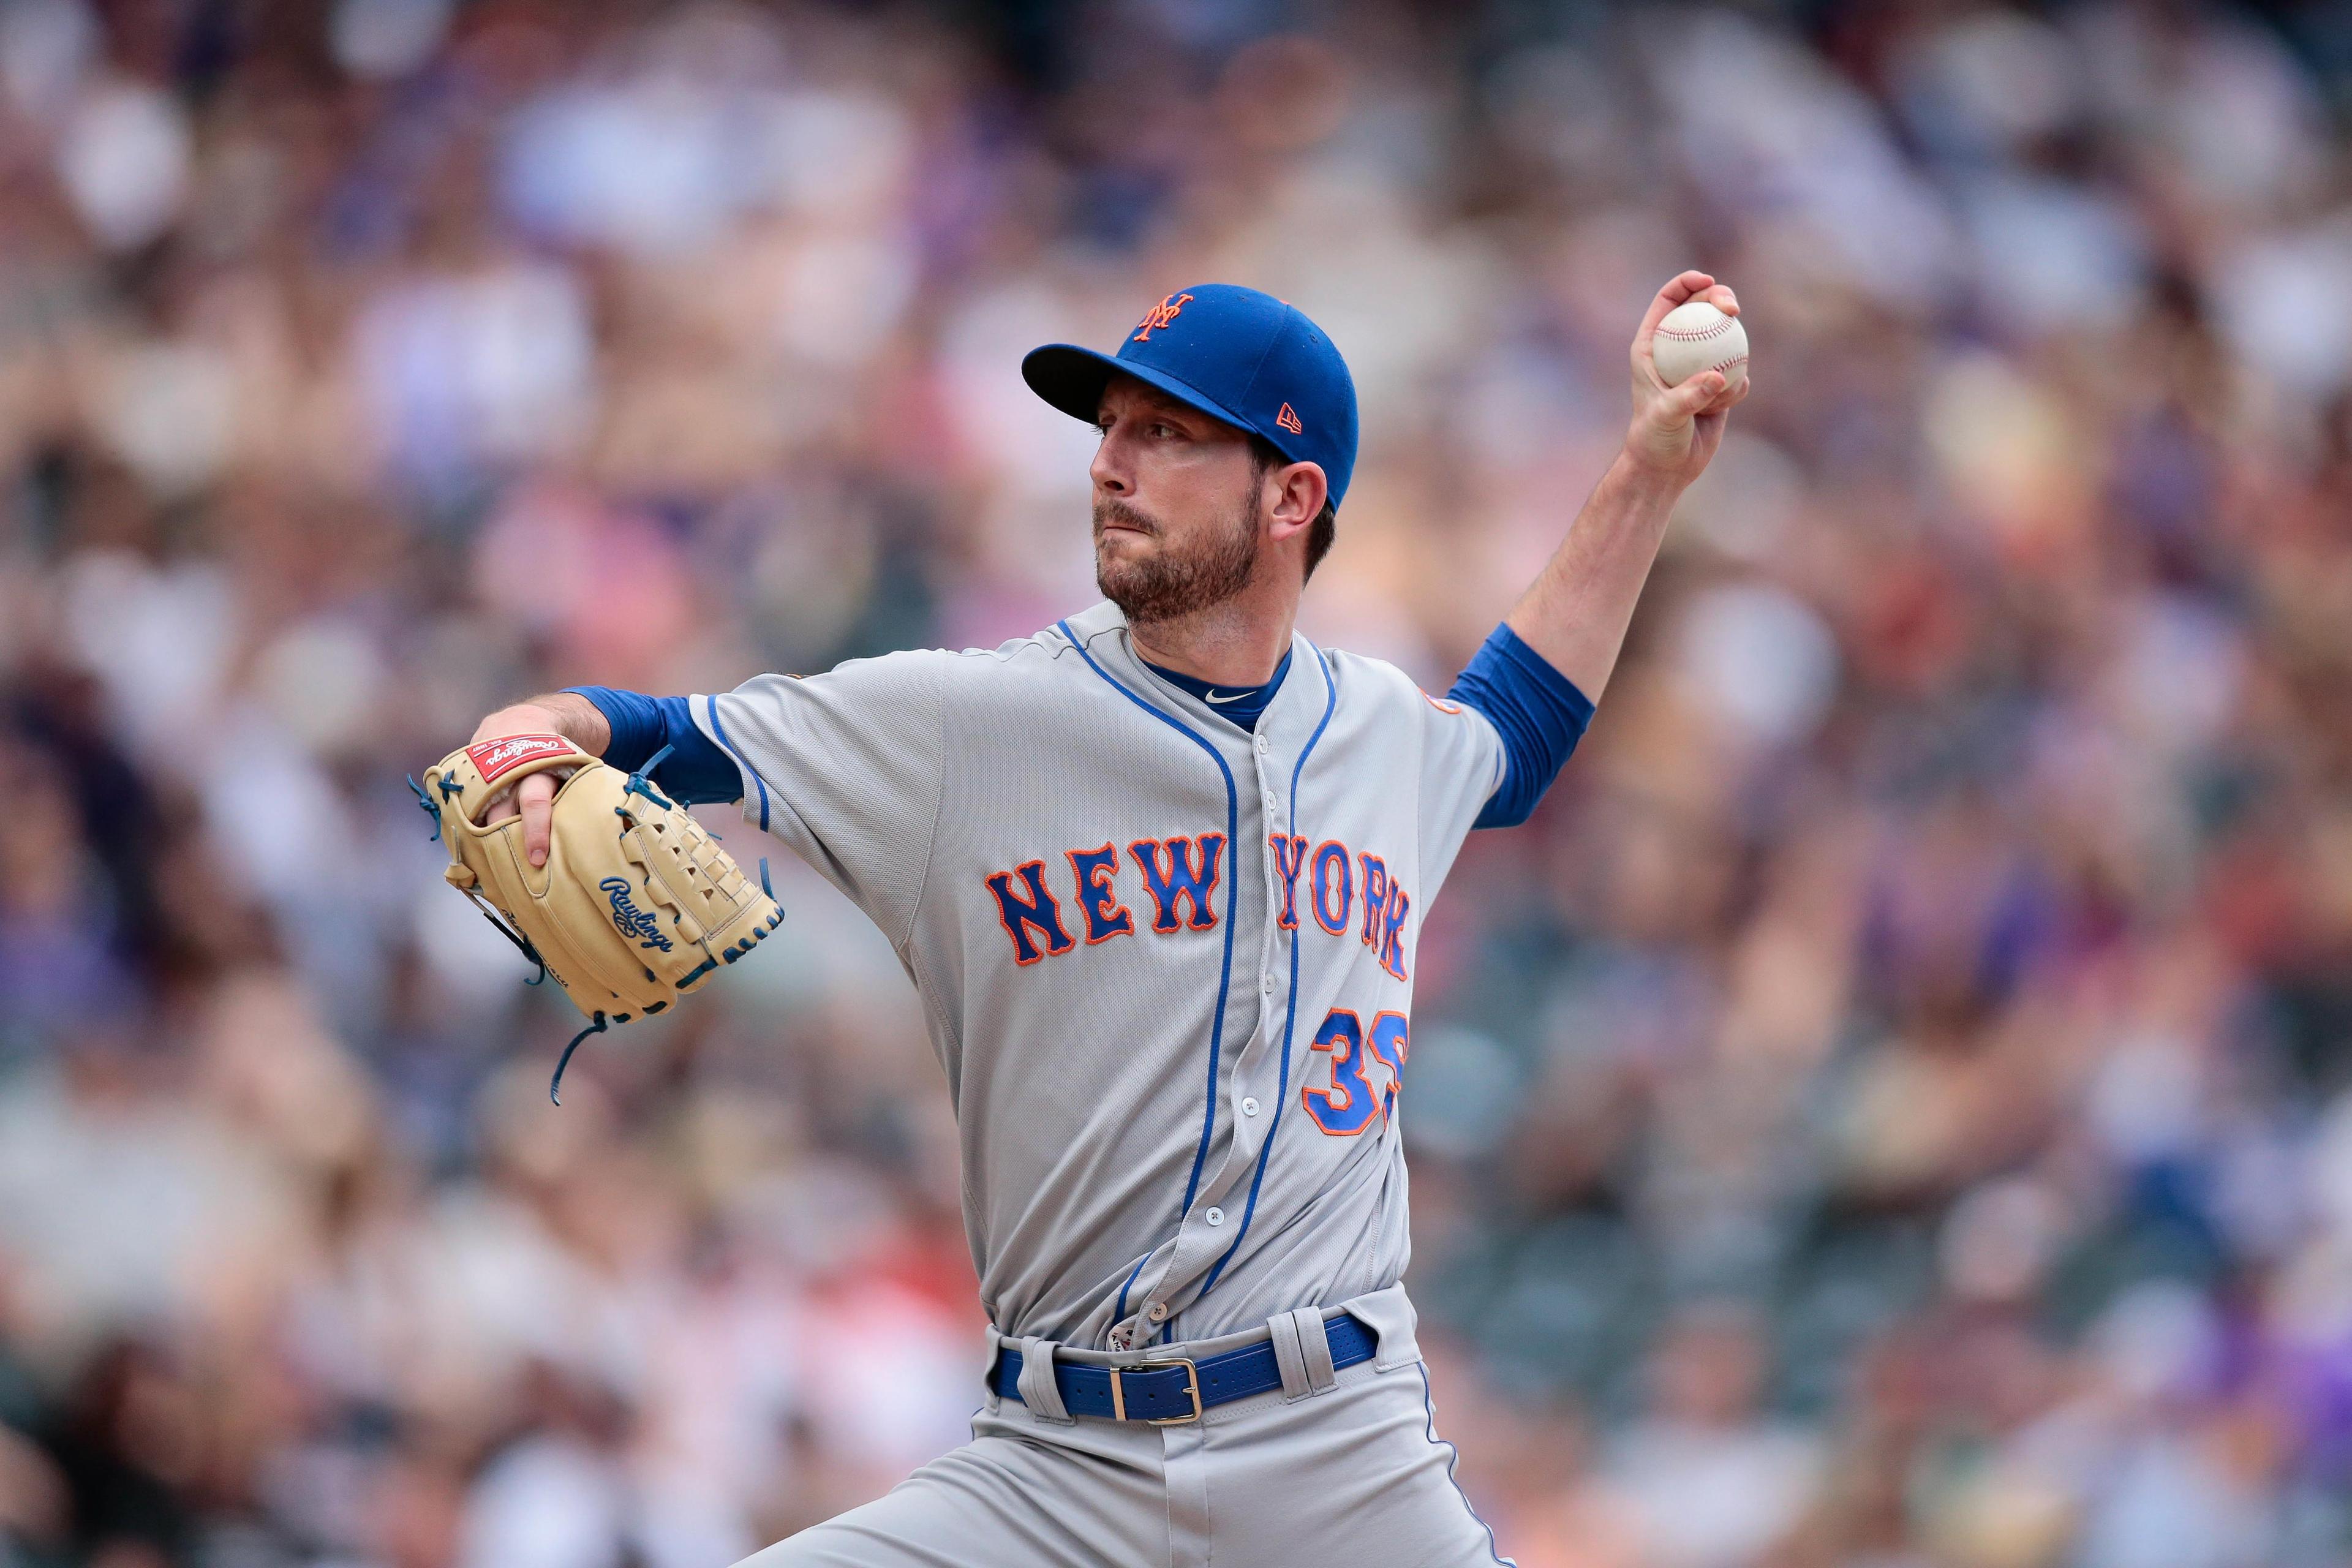 Jun 21, 2018; Denver, CO, USA; New York Mets relief pitcher Jerry Blevins (39) pitches in the eighth inning against the Colorado Rockies at Coors Field. / Isaiah J. Downing-USA TODAY Sports